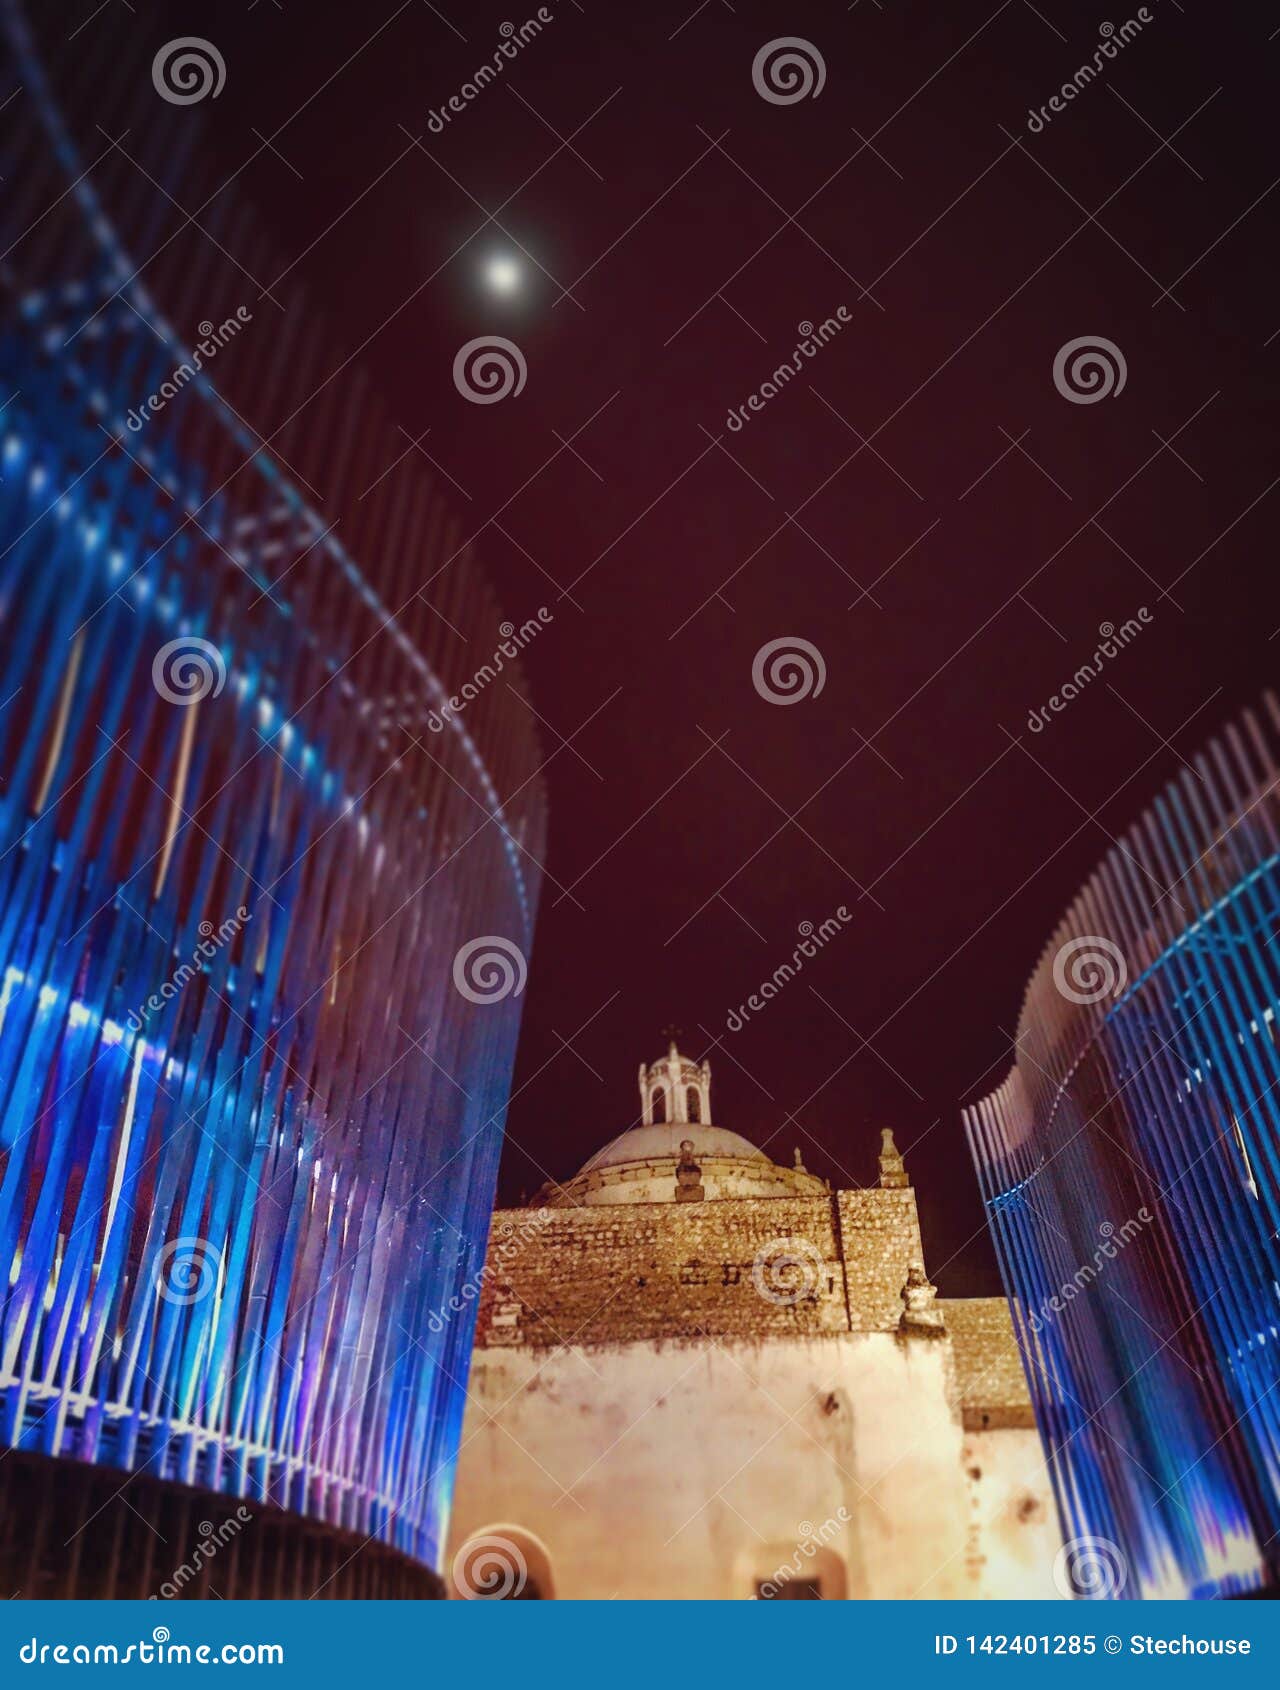 a new musical center in the heart of merida, mexico with the moon - mexico